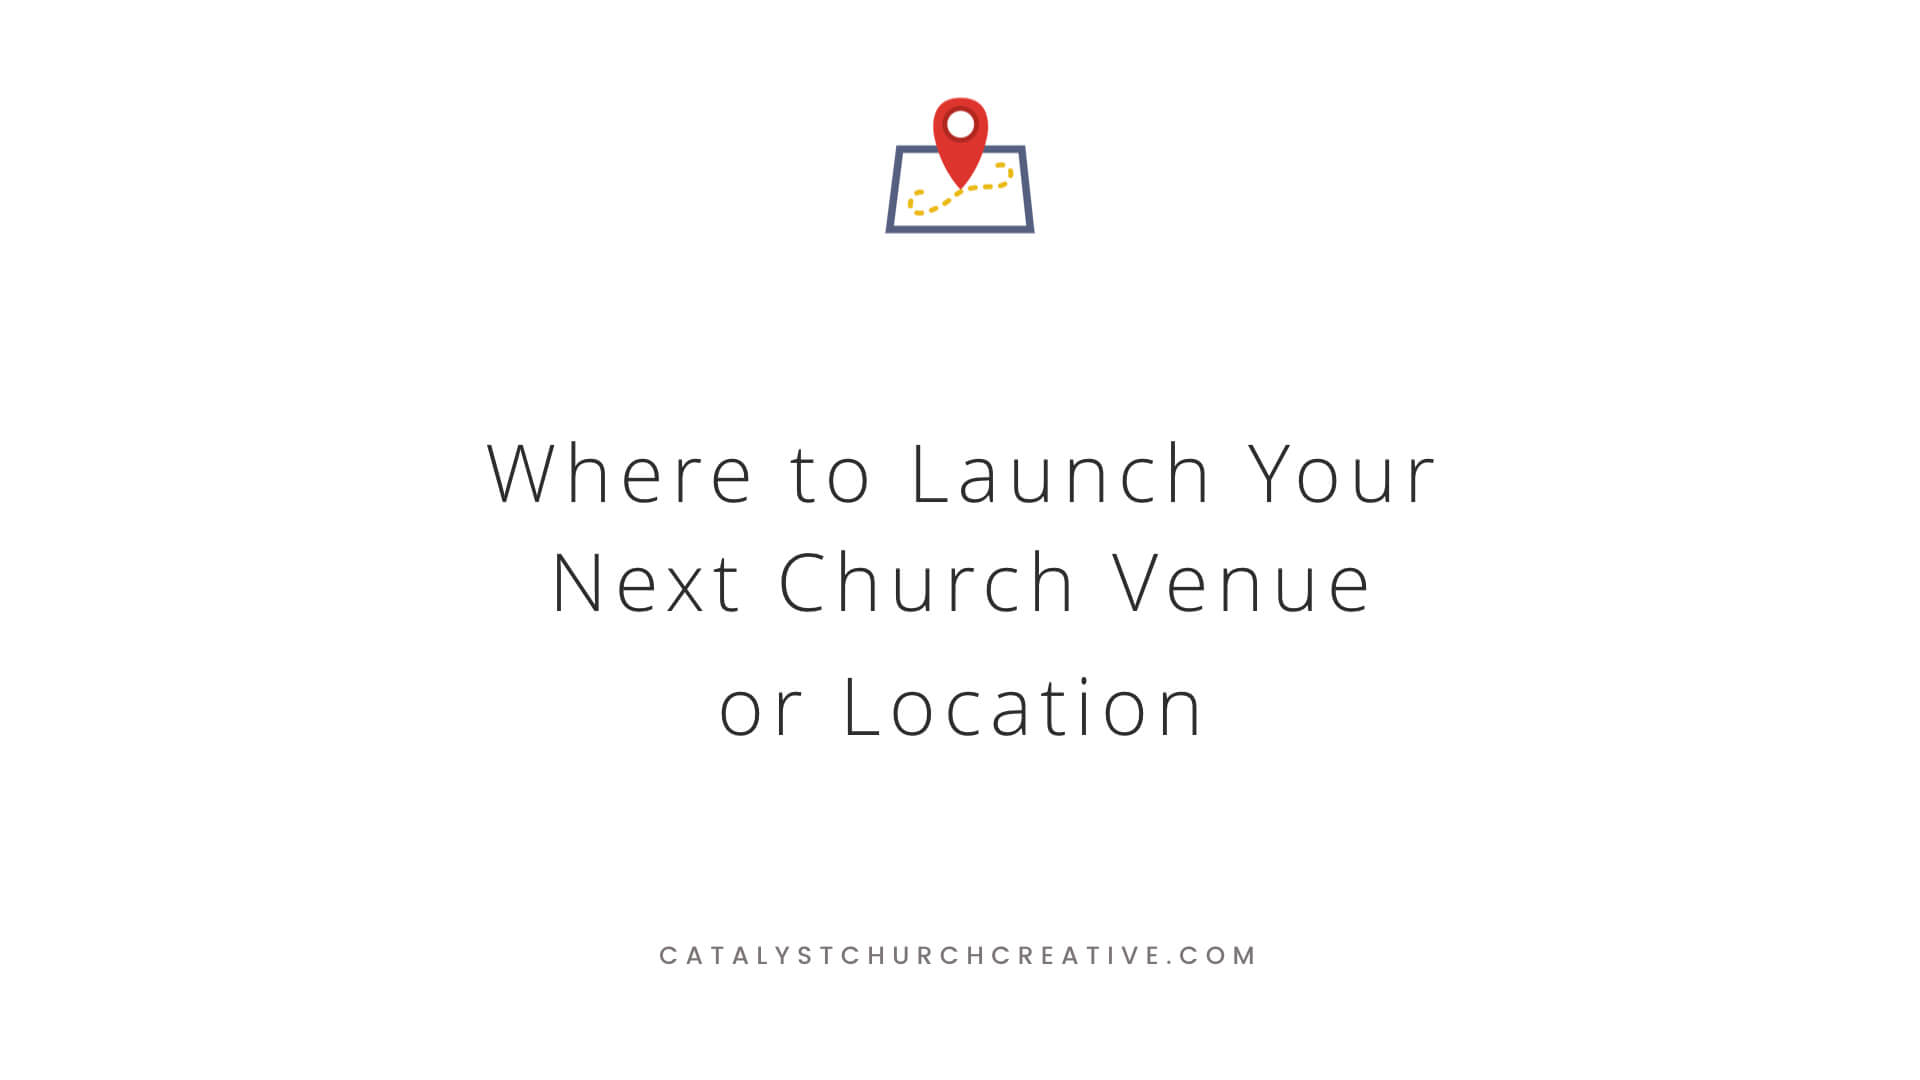 where and how to launch your next church venue or location